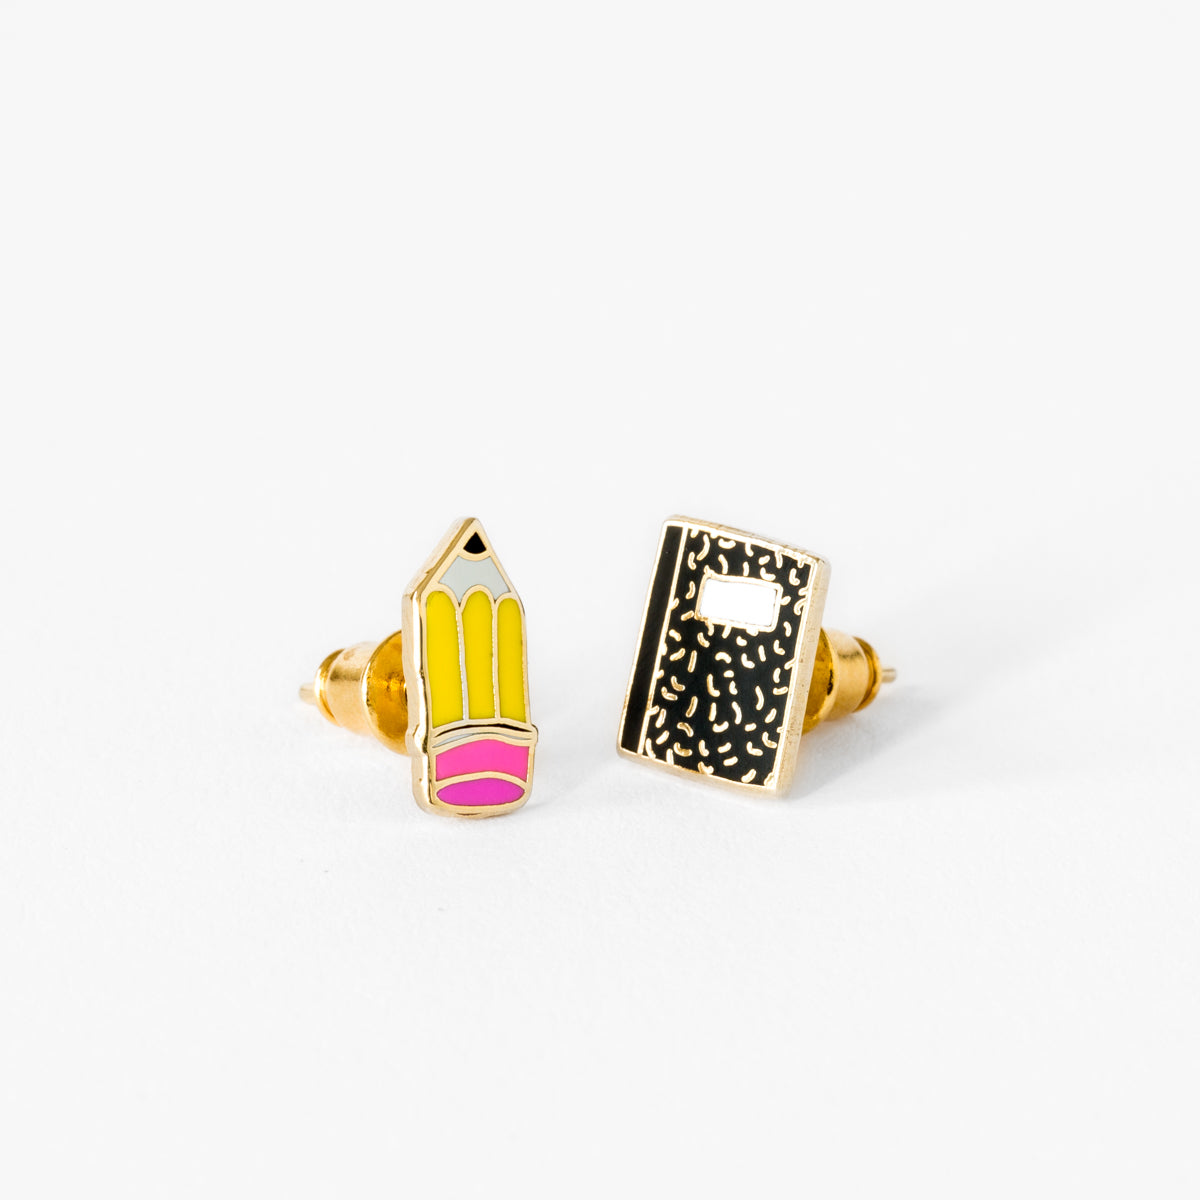 Pencil and Notebook Earrings